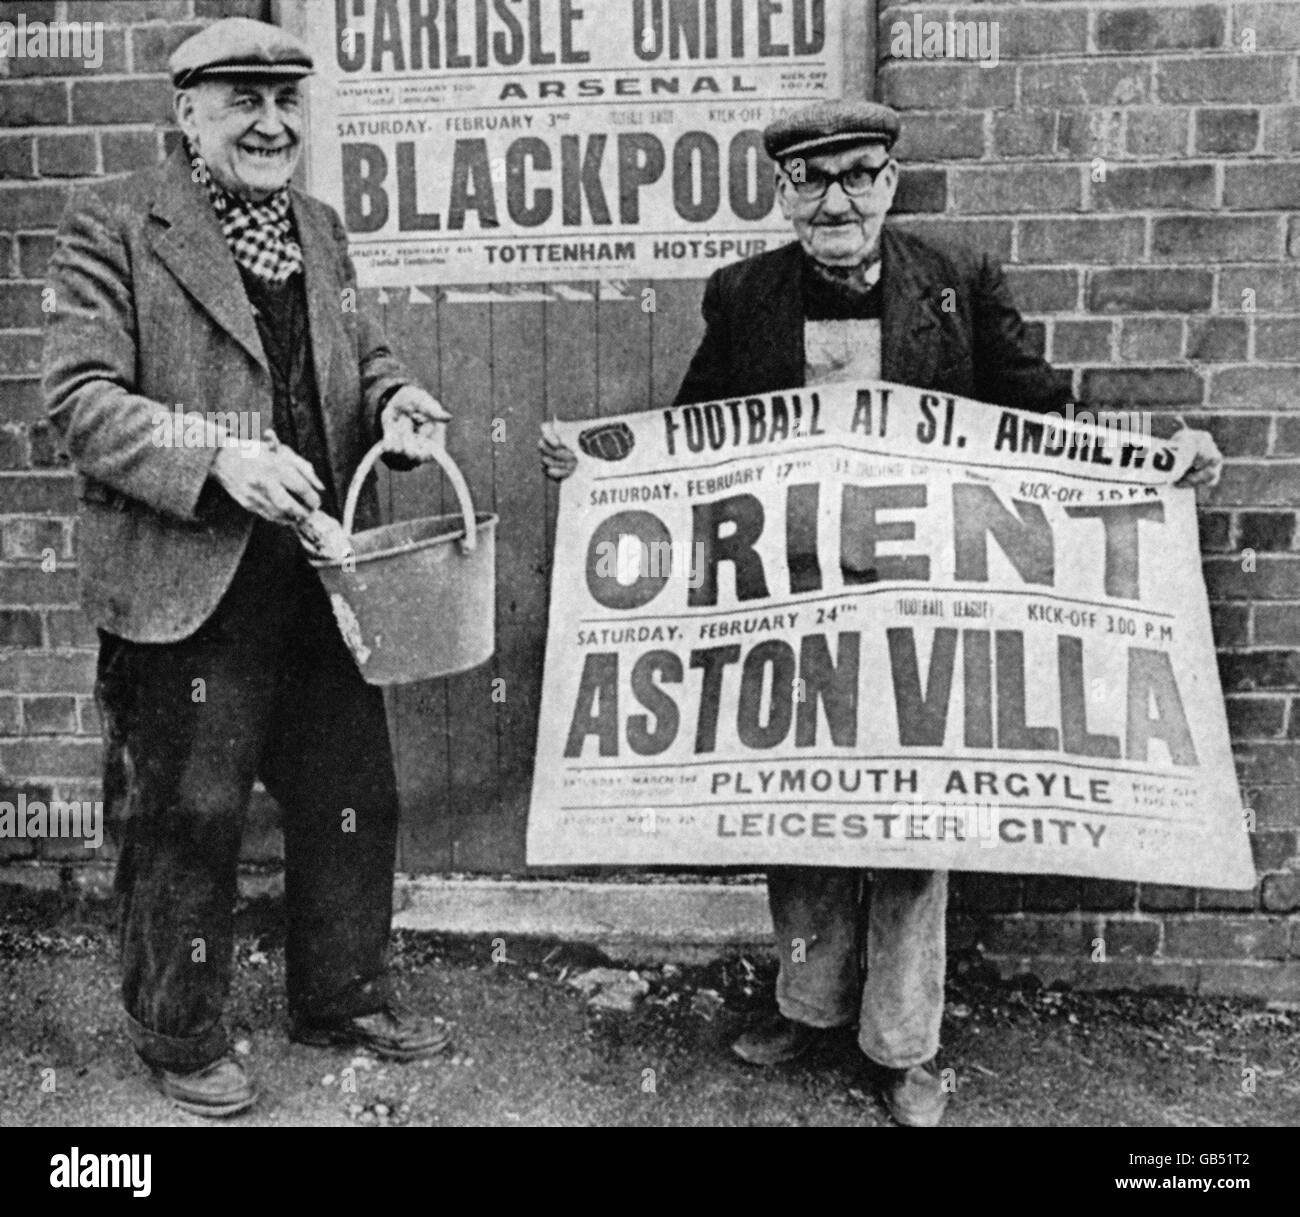 (L-R) Birmingham City's George Moore and Tommy Bell prepare to paste up a poster advertising the forthcoming fixtures taking place at St Andrew's. Stock Photo